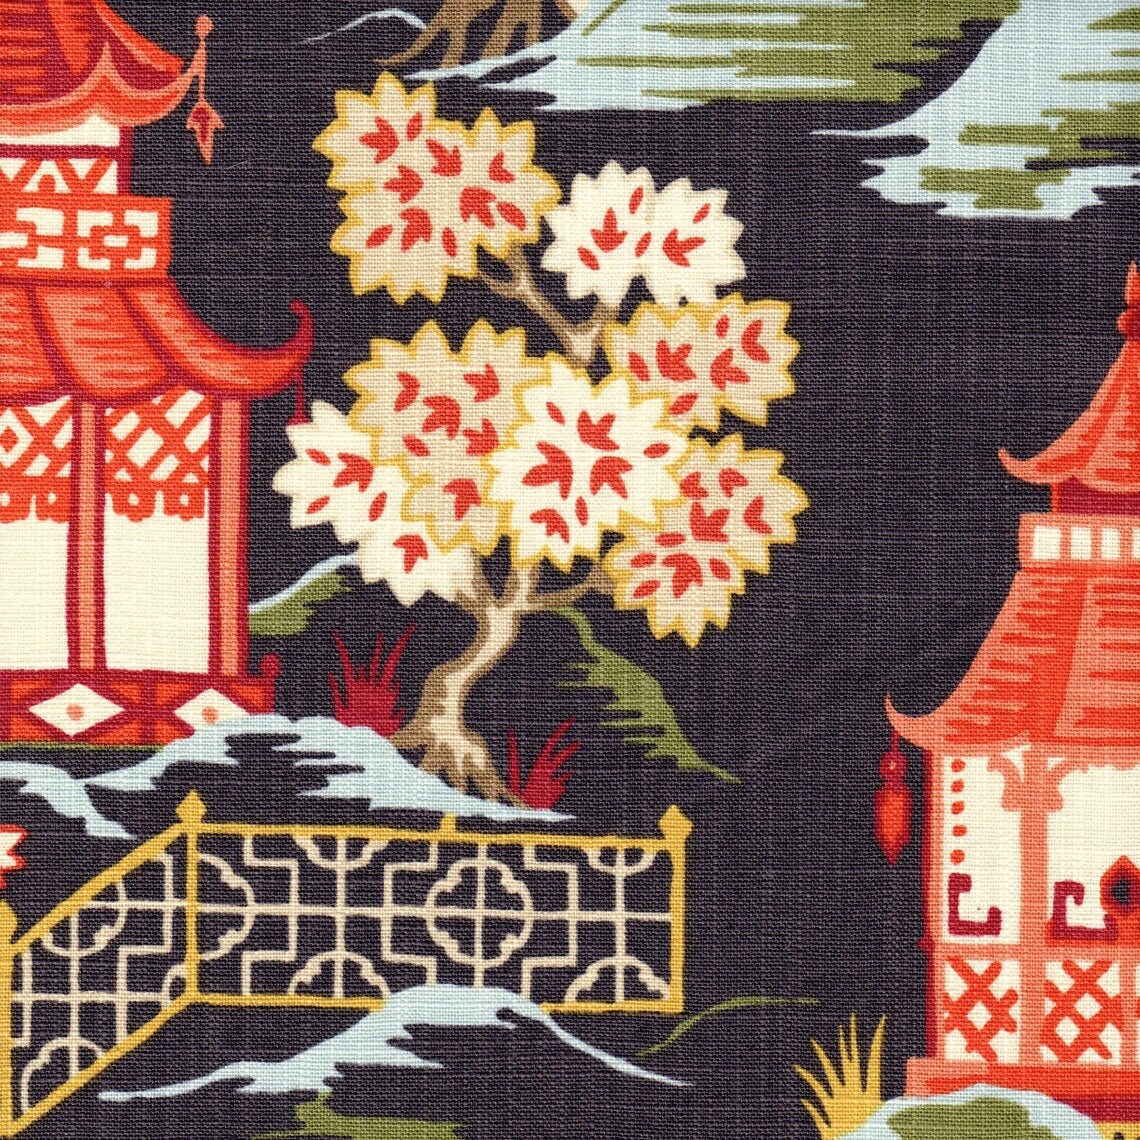 gathered bedskirt in shoji lacquer oriental toile, multicolor chinoiserie